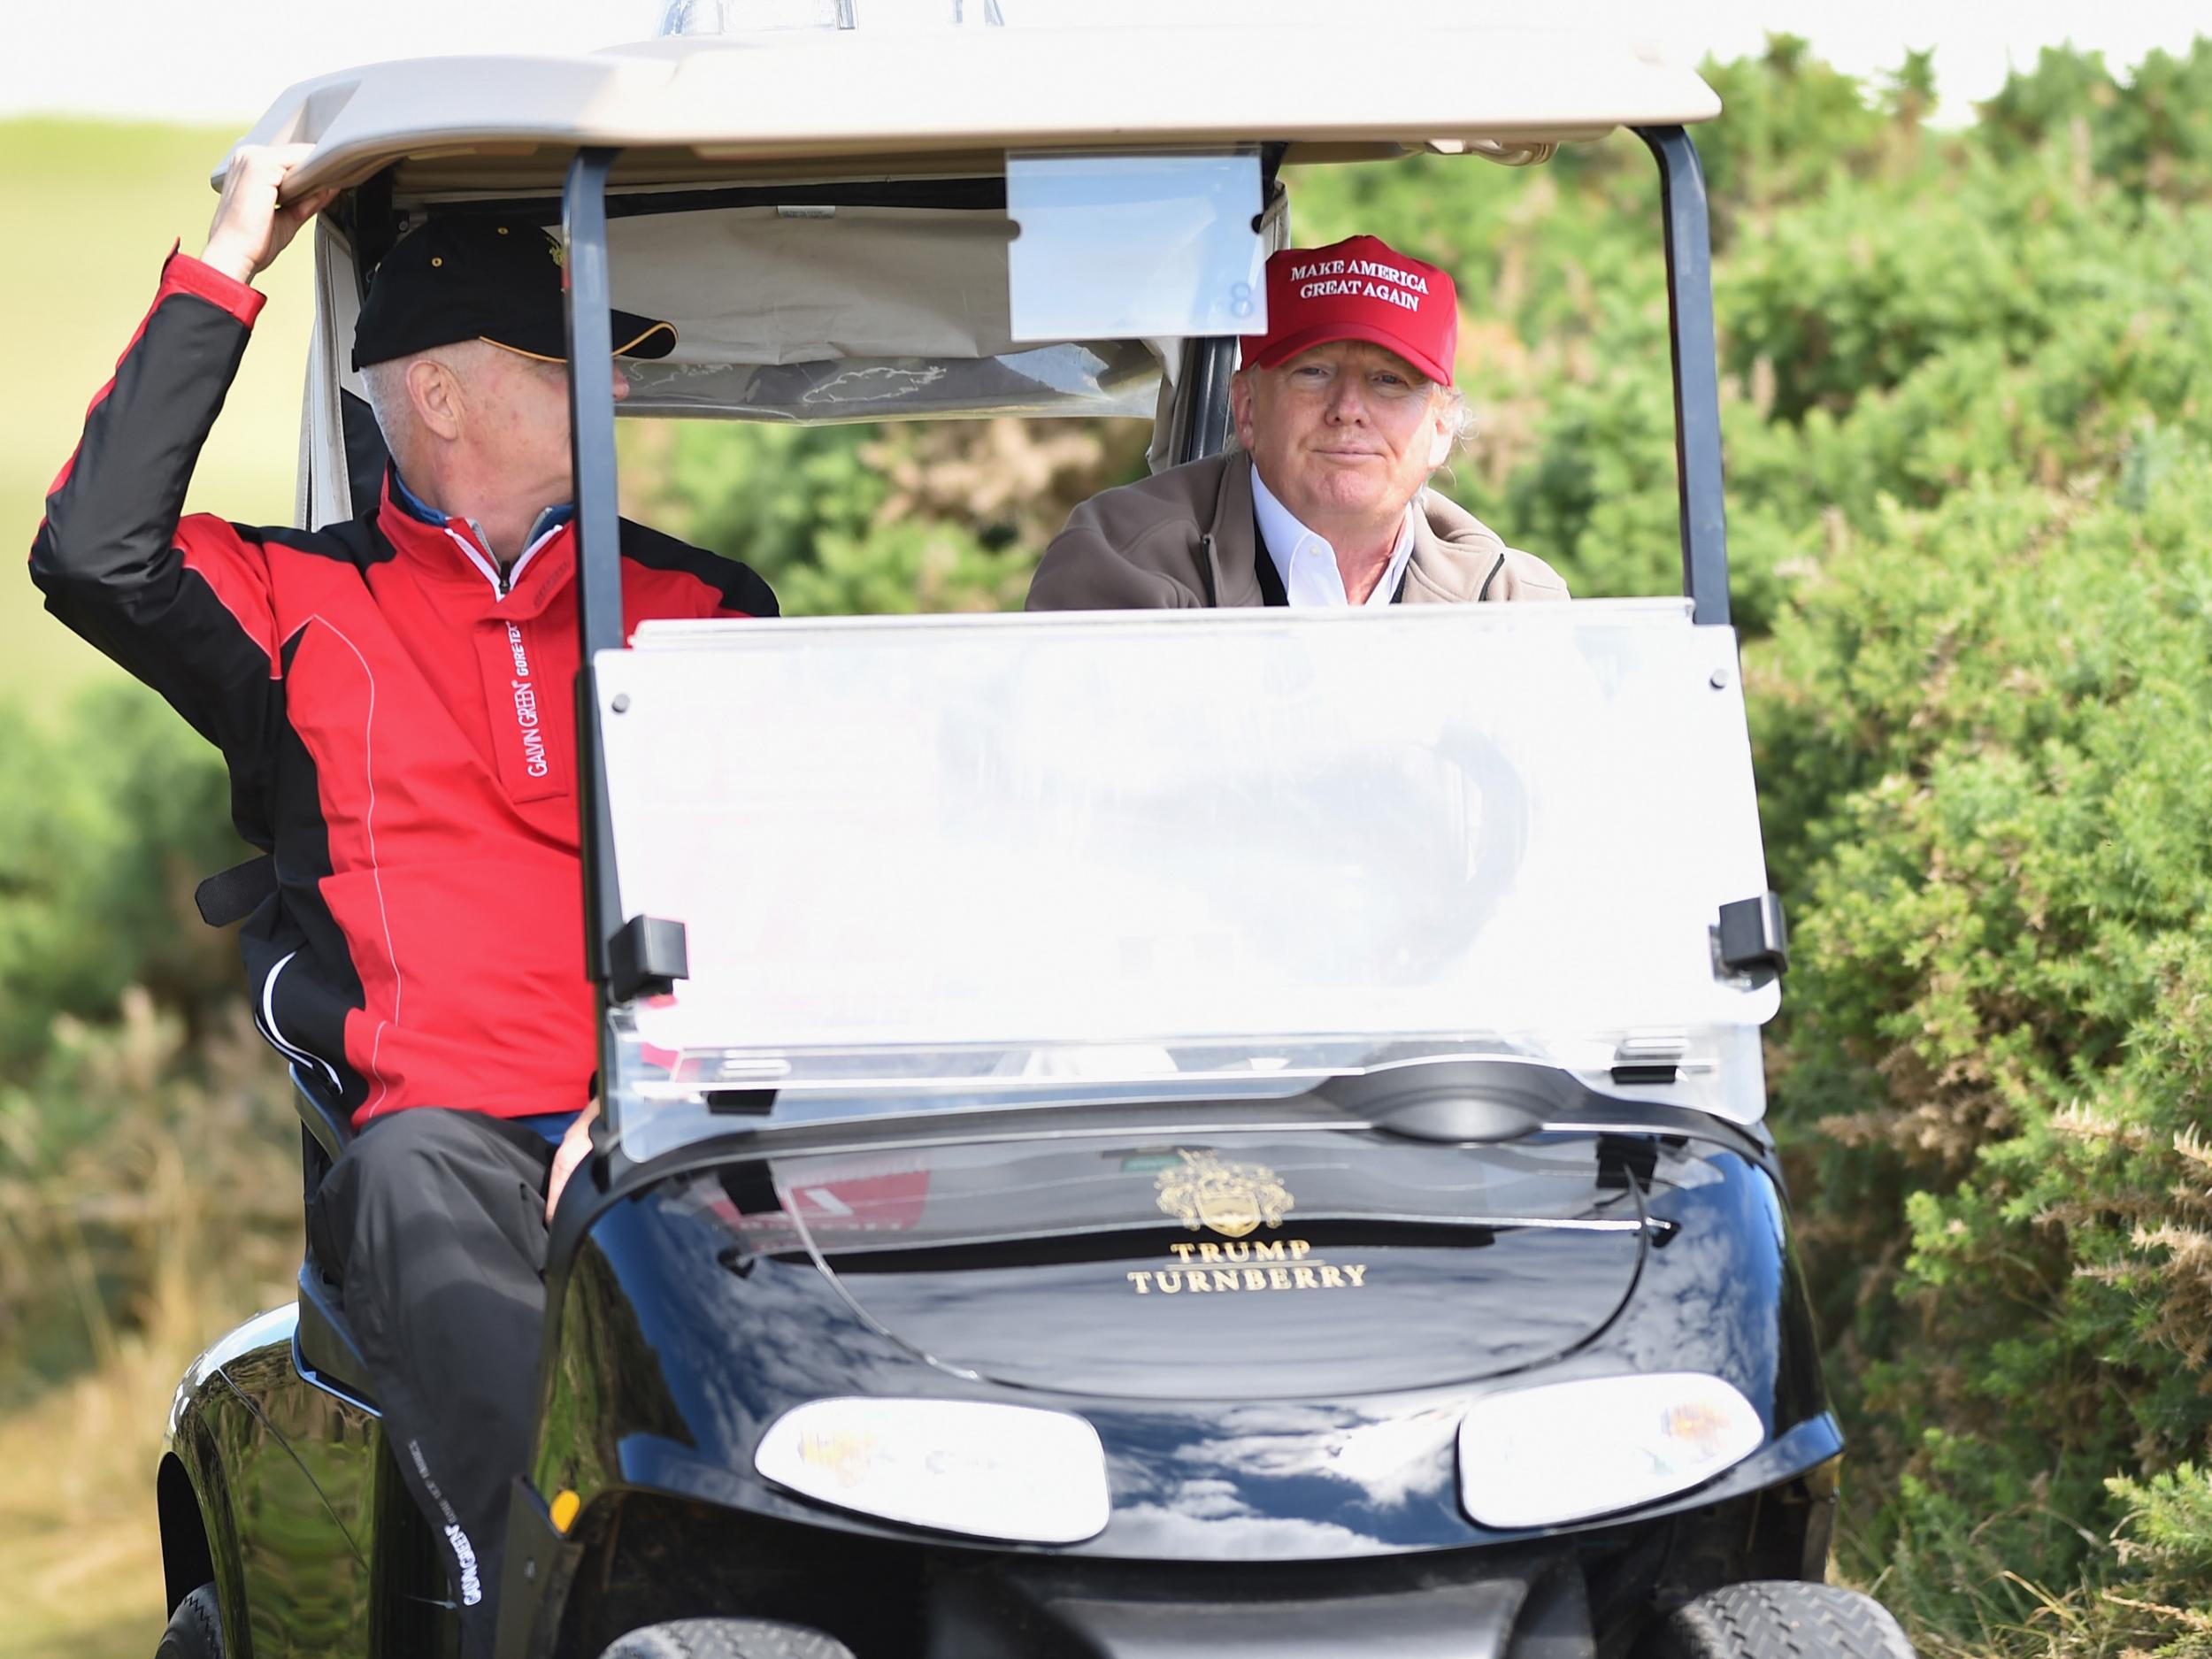 Donald Trump drives a golf buggy during his visits to his Scottish golf course Turnberry in 2016